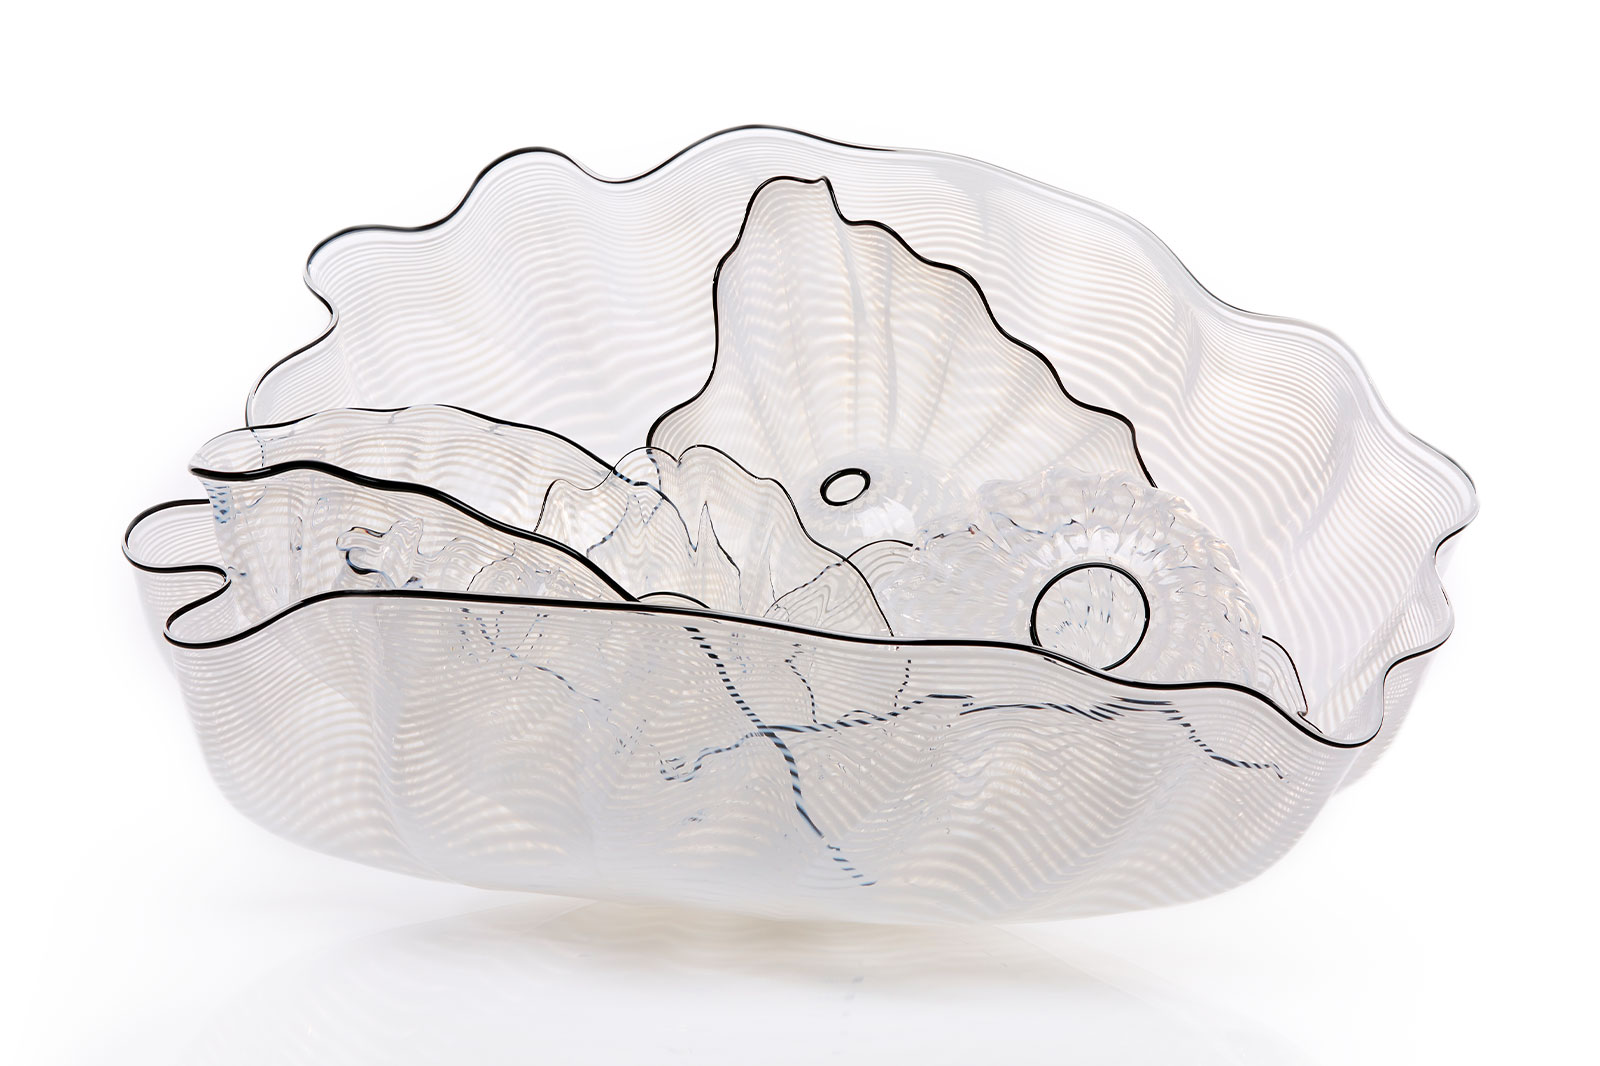 Whitesmoke Seaform Set with Carbon Black Lip Wraps, 1993, by Dale Chihuly